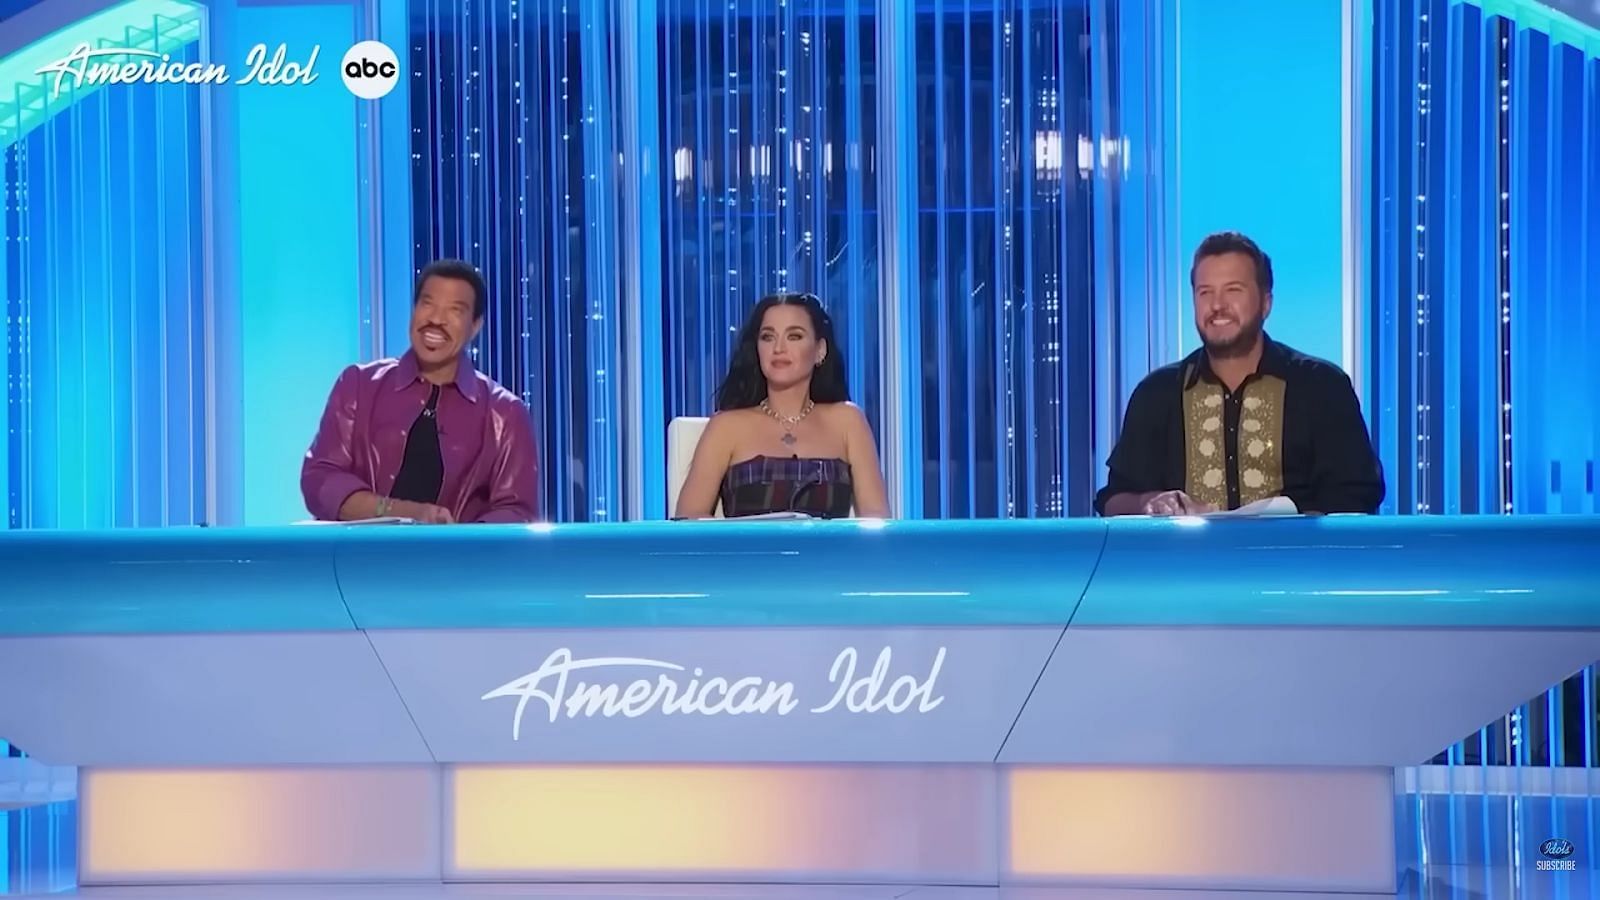 How much a Judge earns from American Idol?